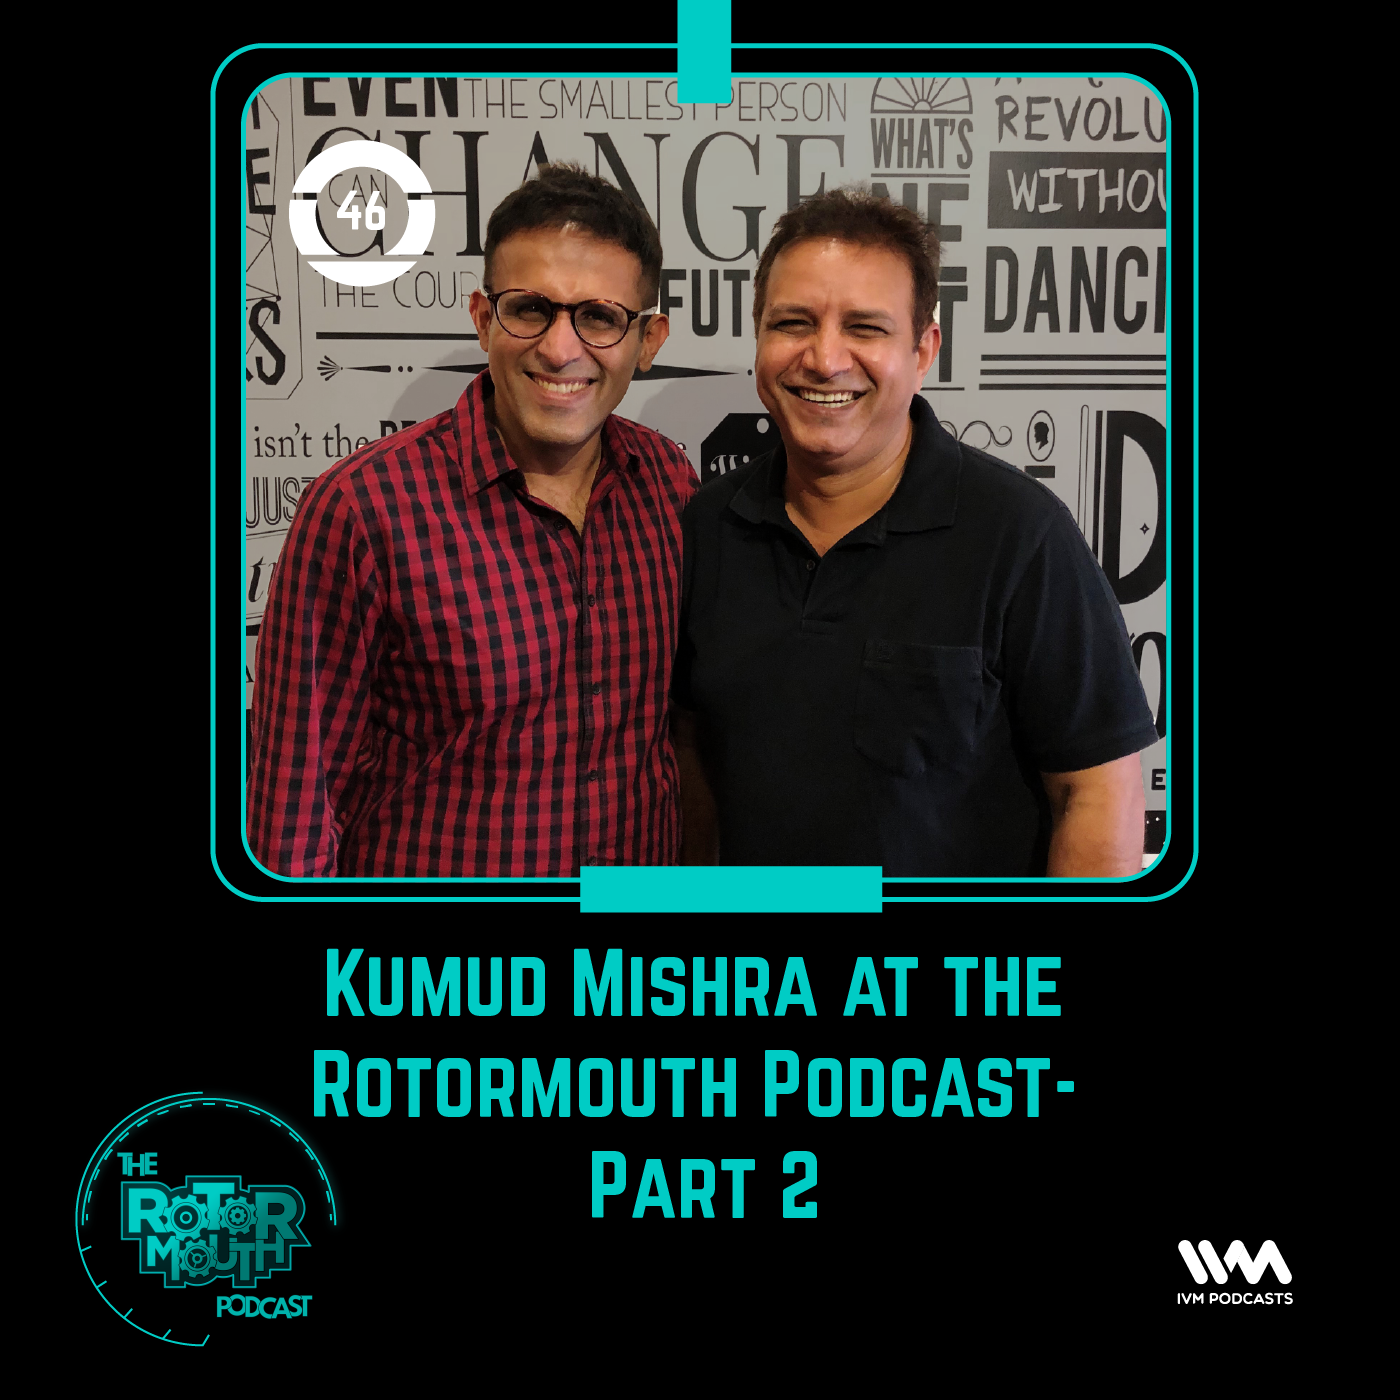 Ep. 46: Kumud Mishra at the Rotormouth Podcast - Part 2